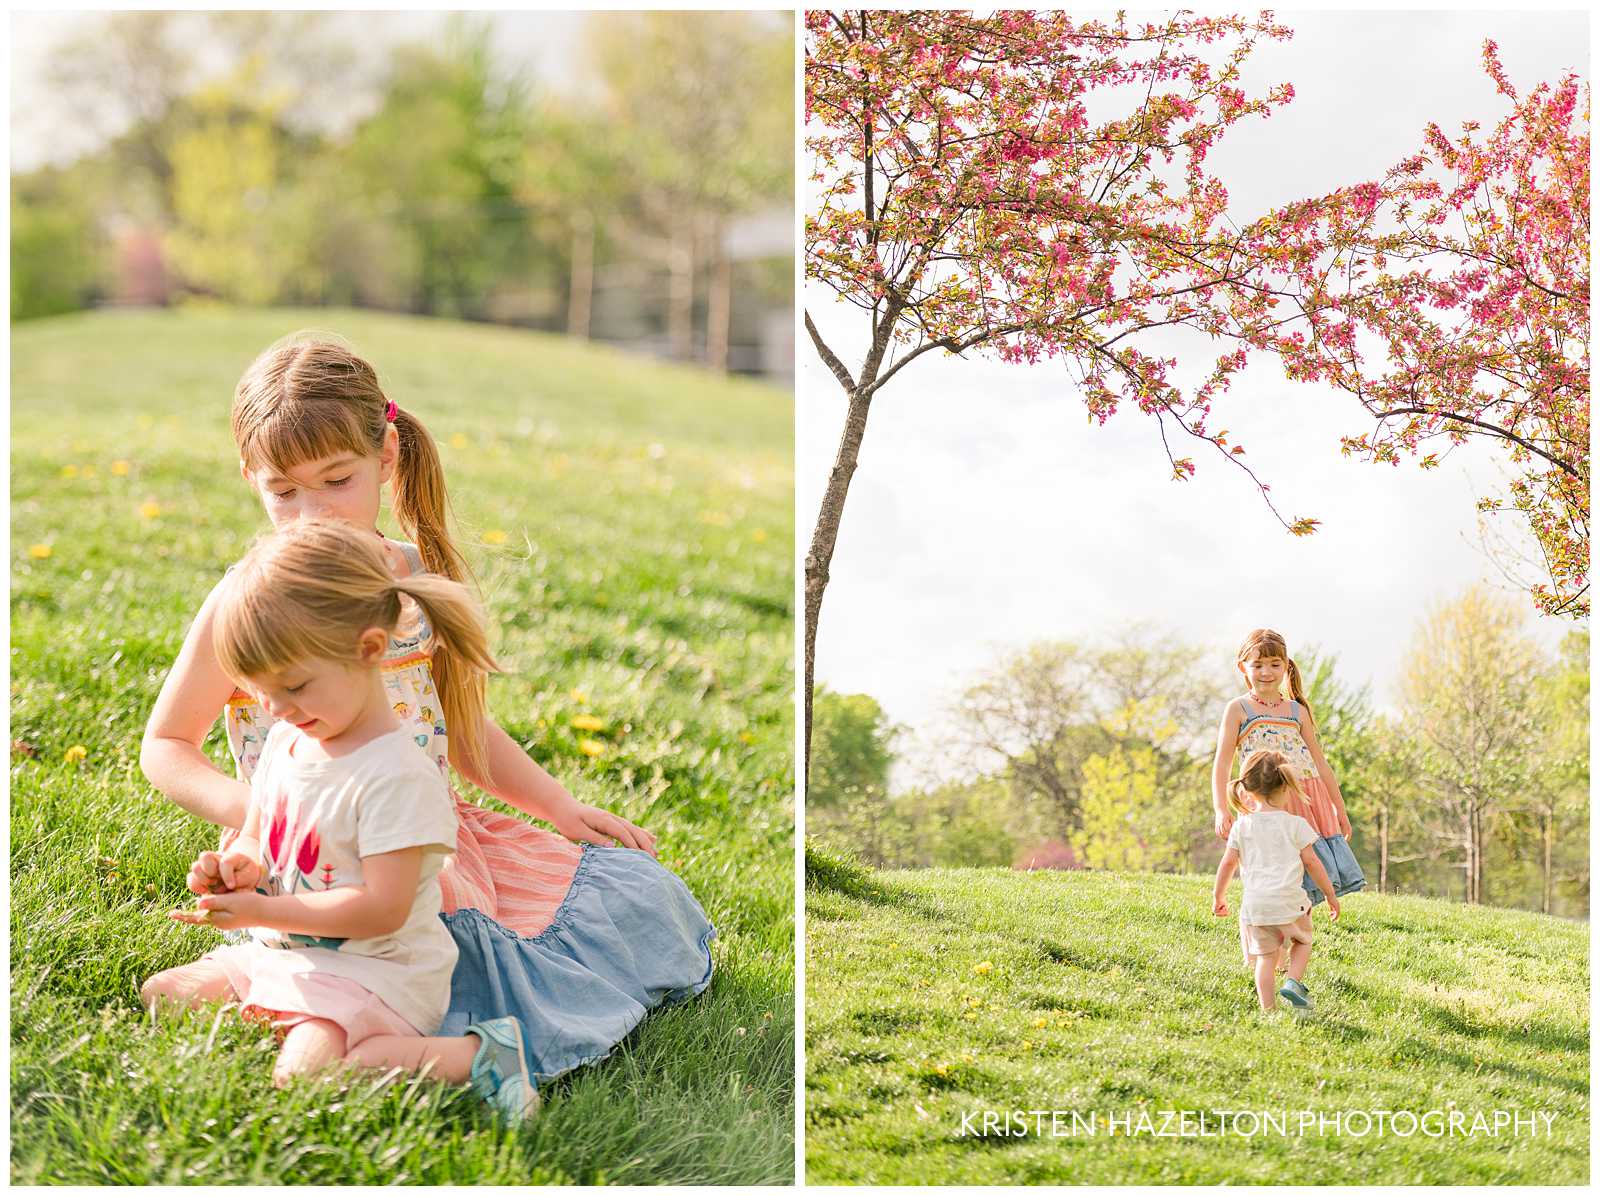 Euclid Square Park family photos of a younger and older sister playing under pink crabapple blossoms.